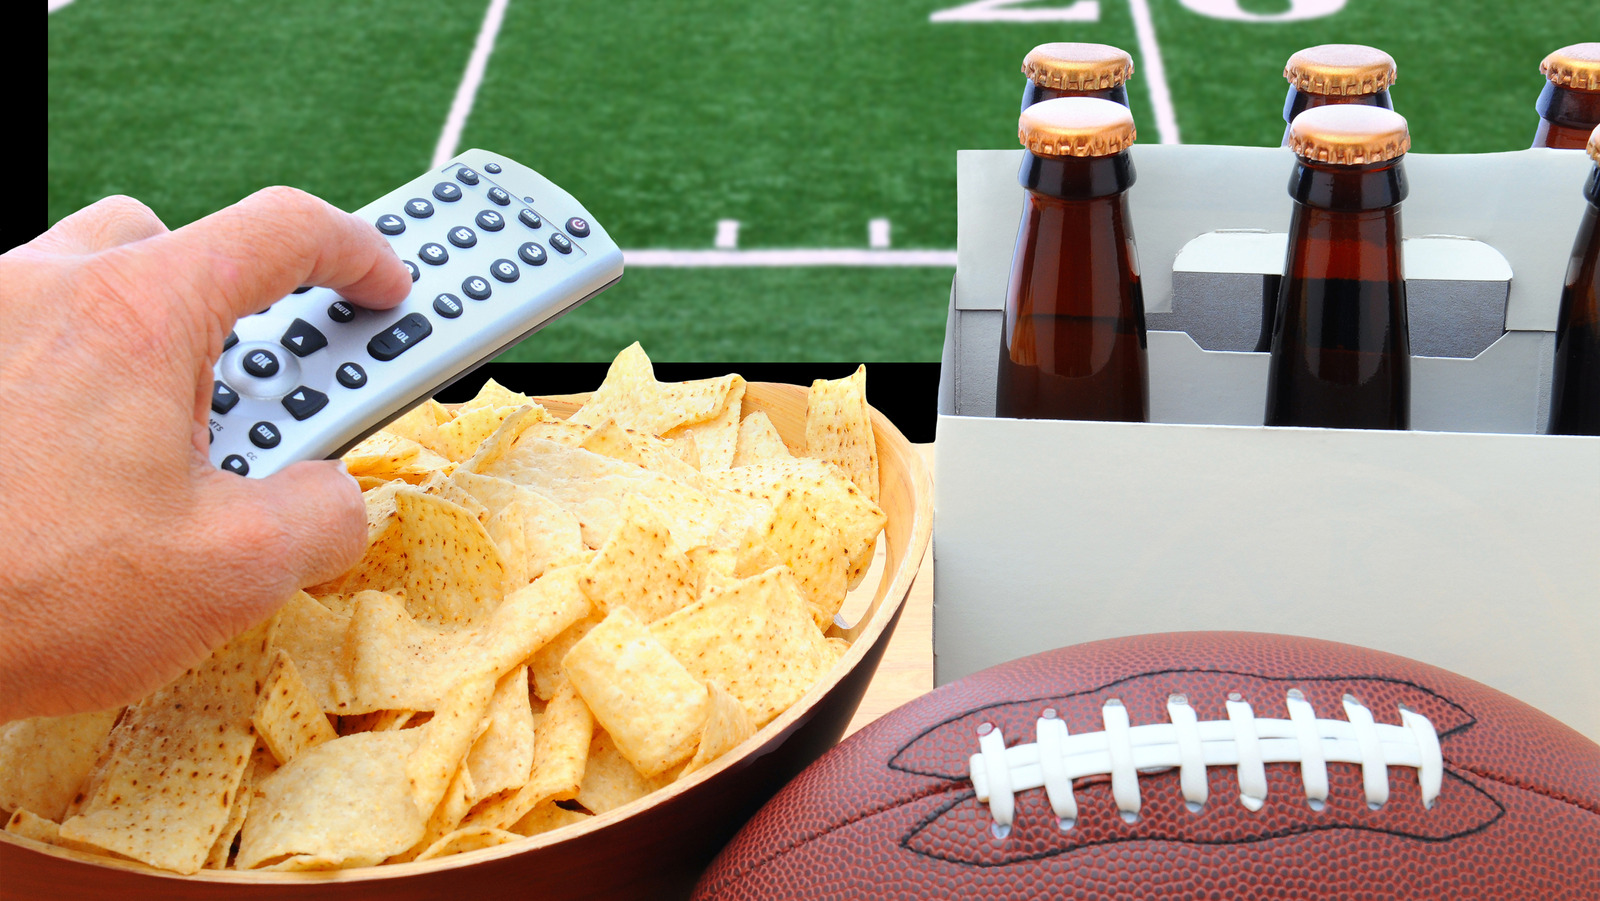 The Super Bowl 2023 Food Commercials You Need To Watch